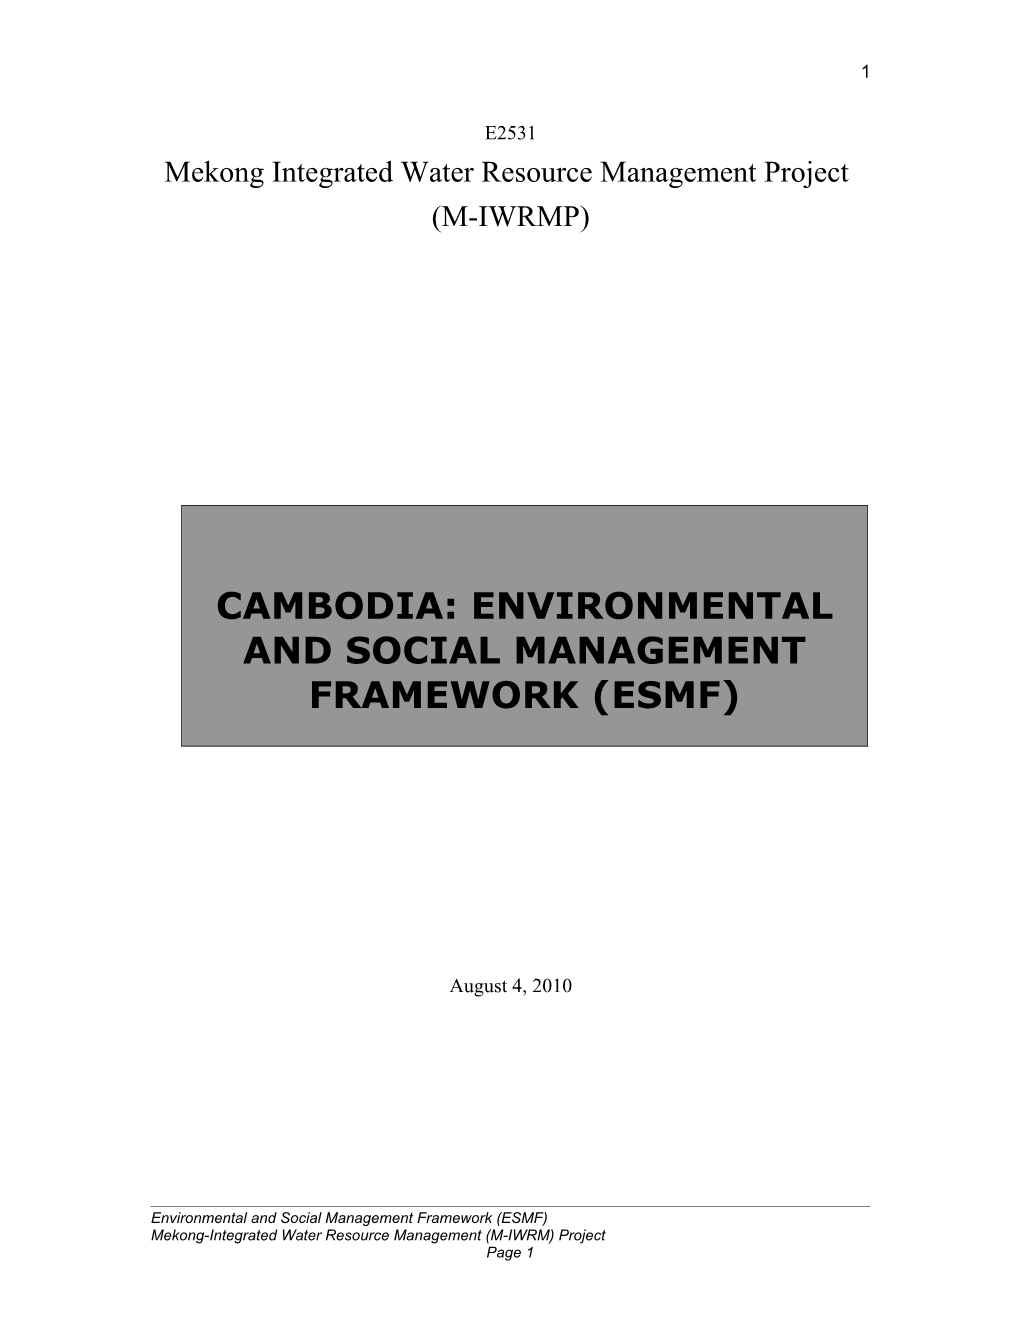 Mekong Integrated Water Resource Management Project